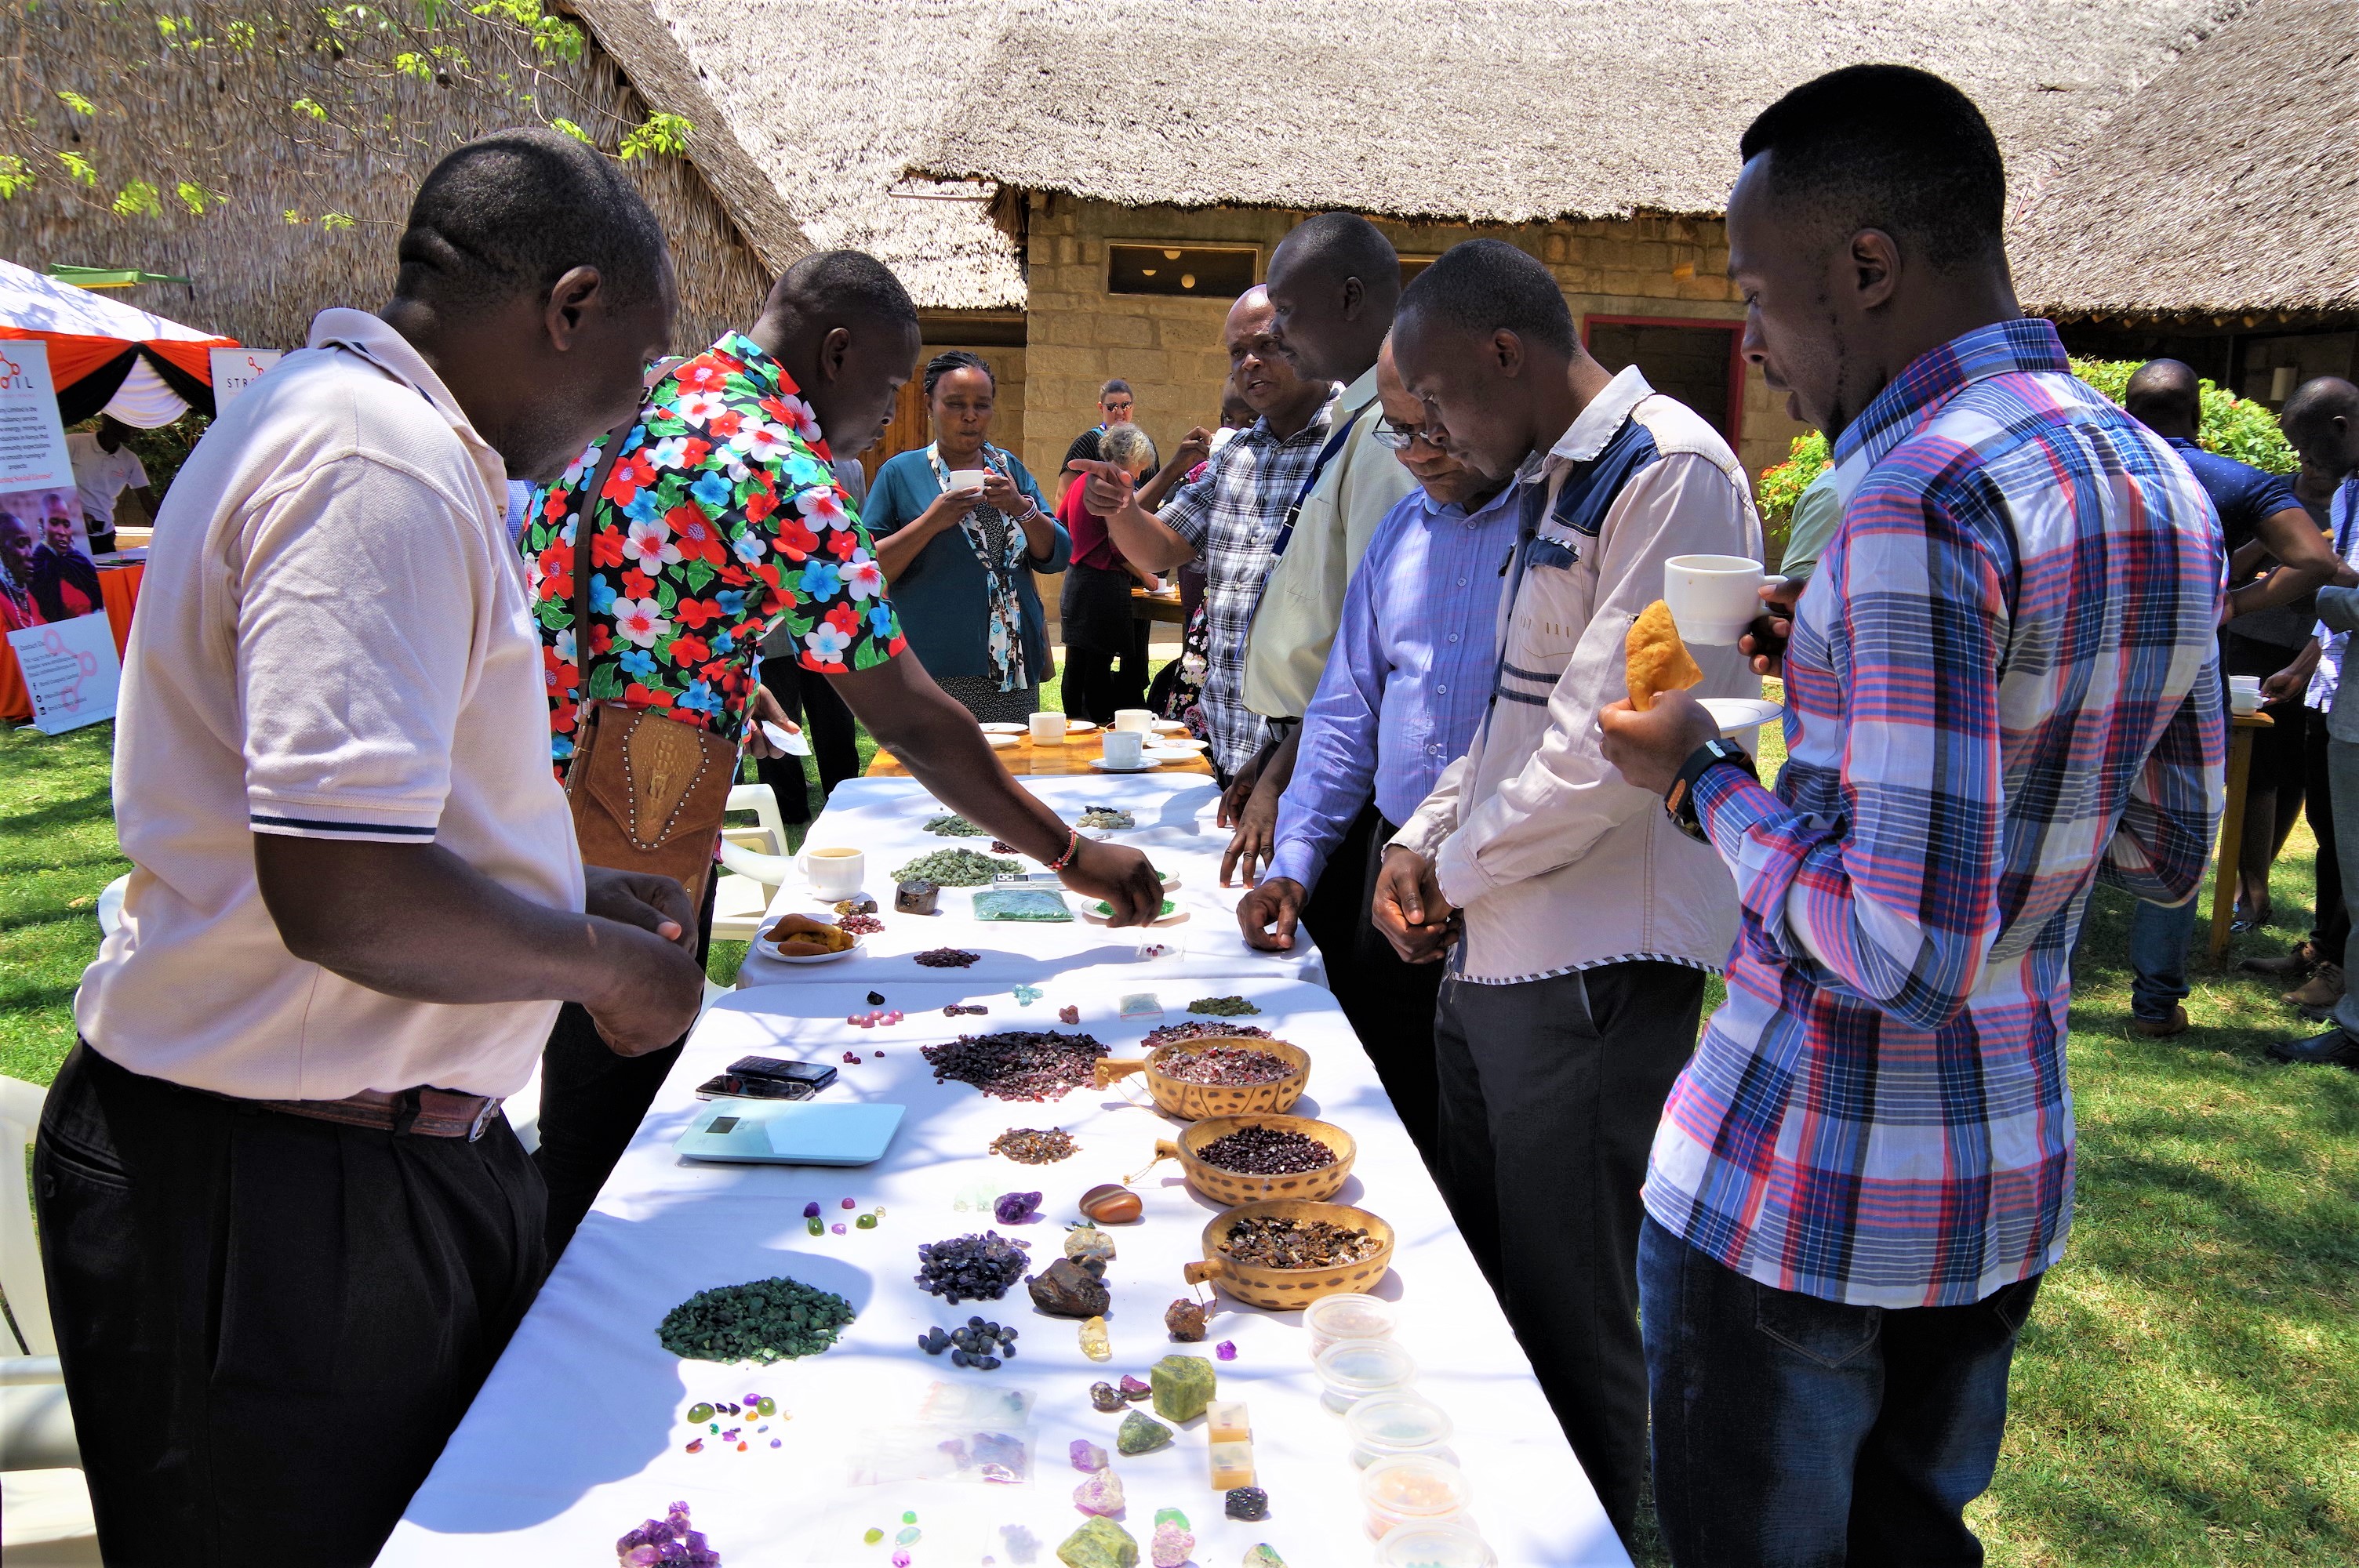 Artisanal and small-scale minors presenting gemstones mined in Tiata Taveta county at the CEMEREM conference